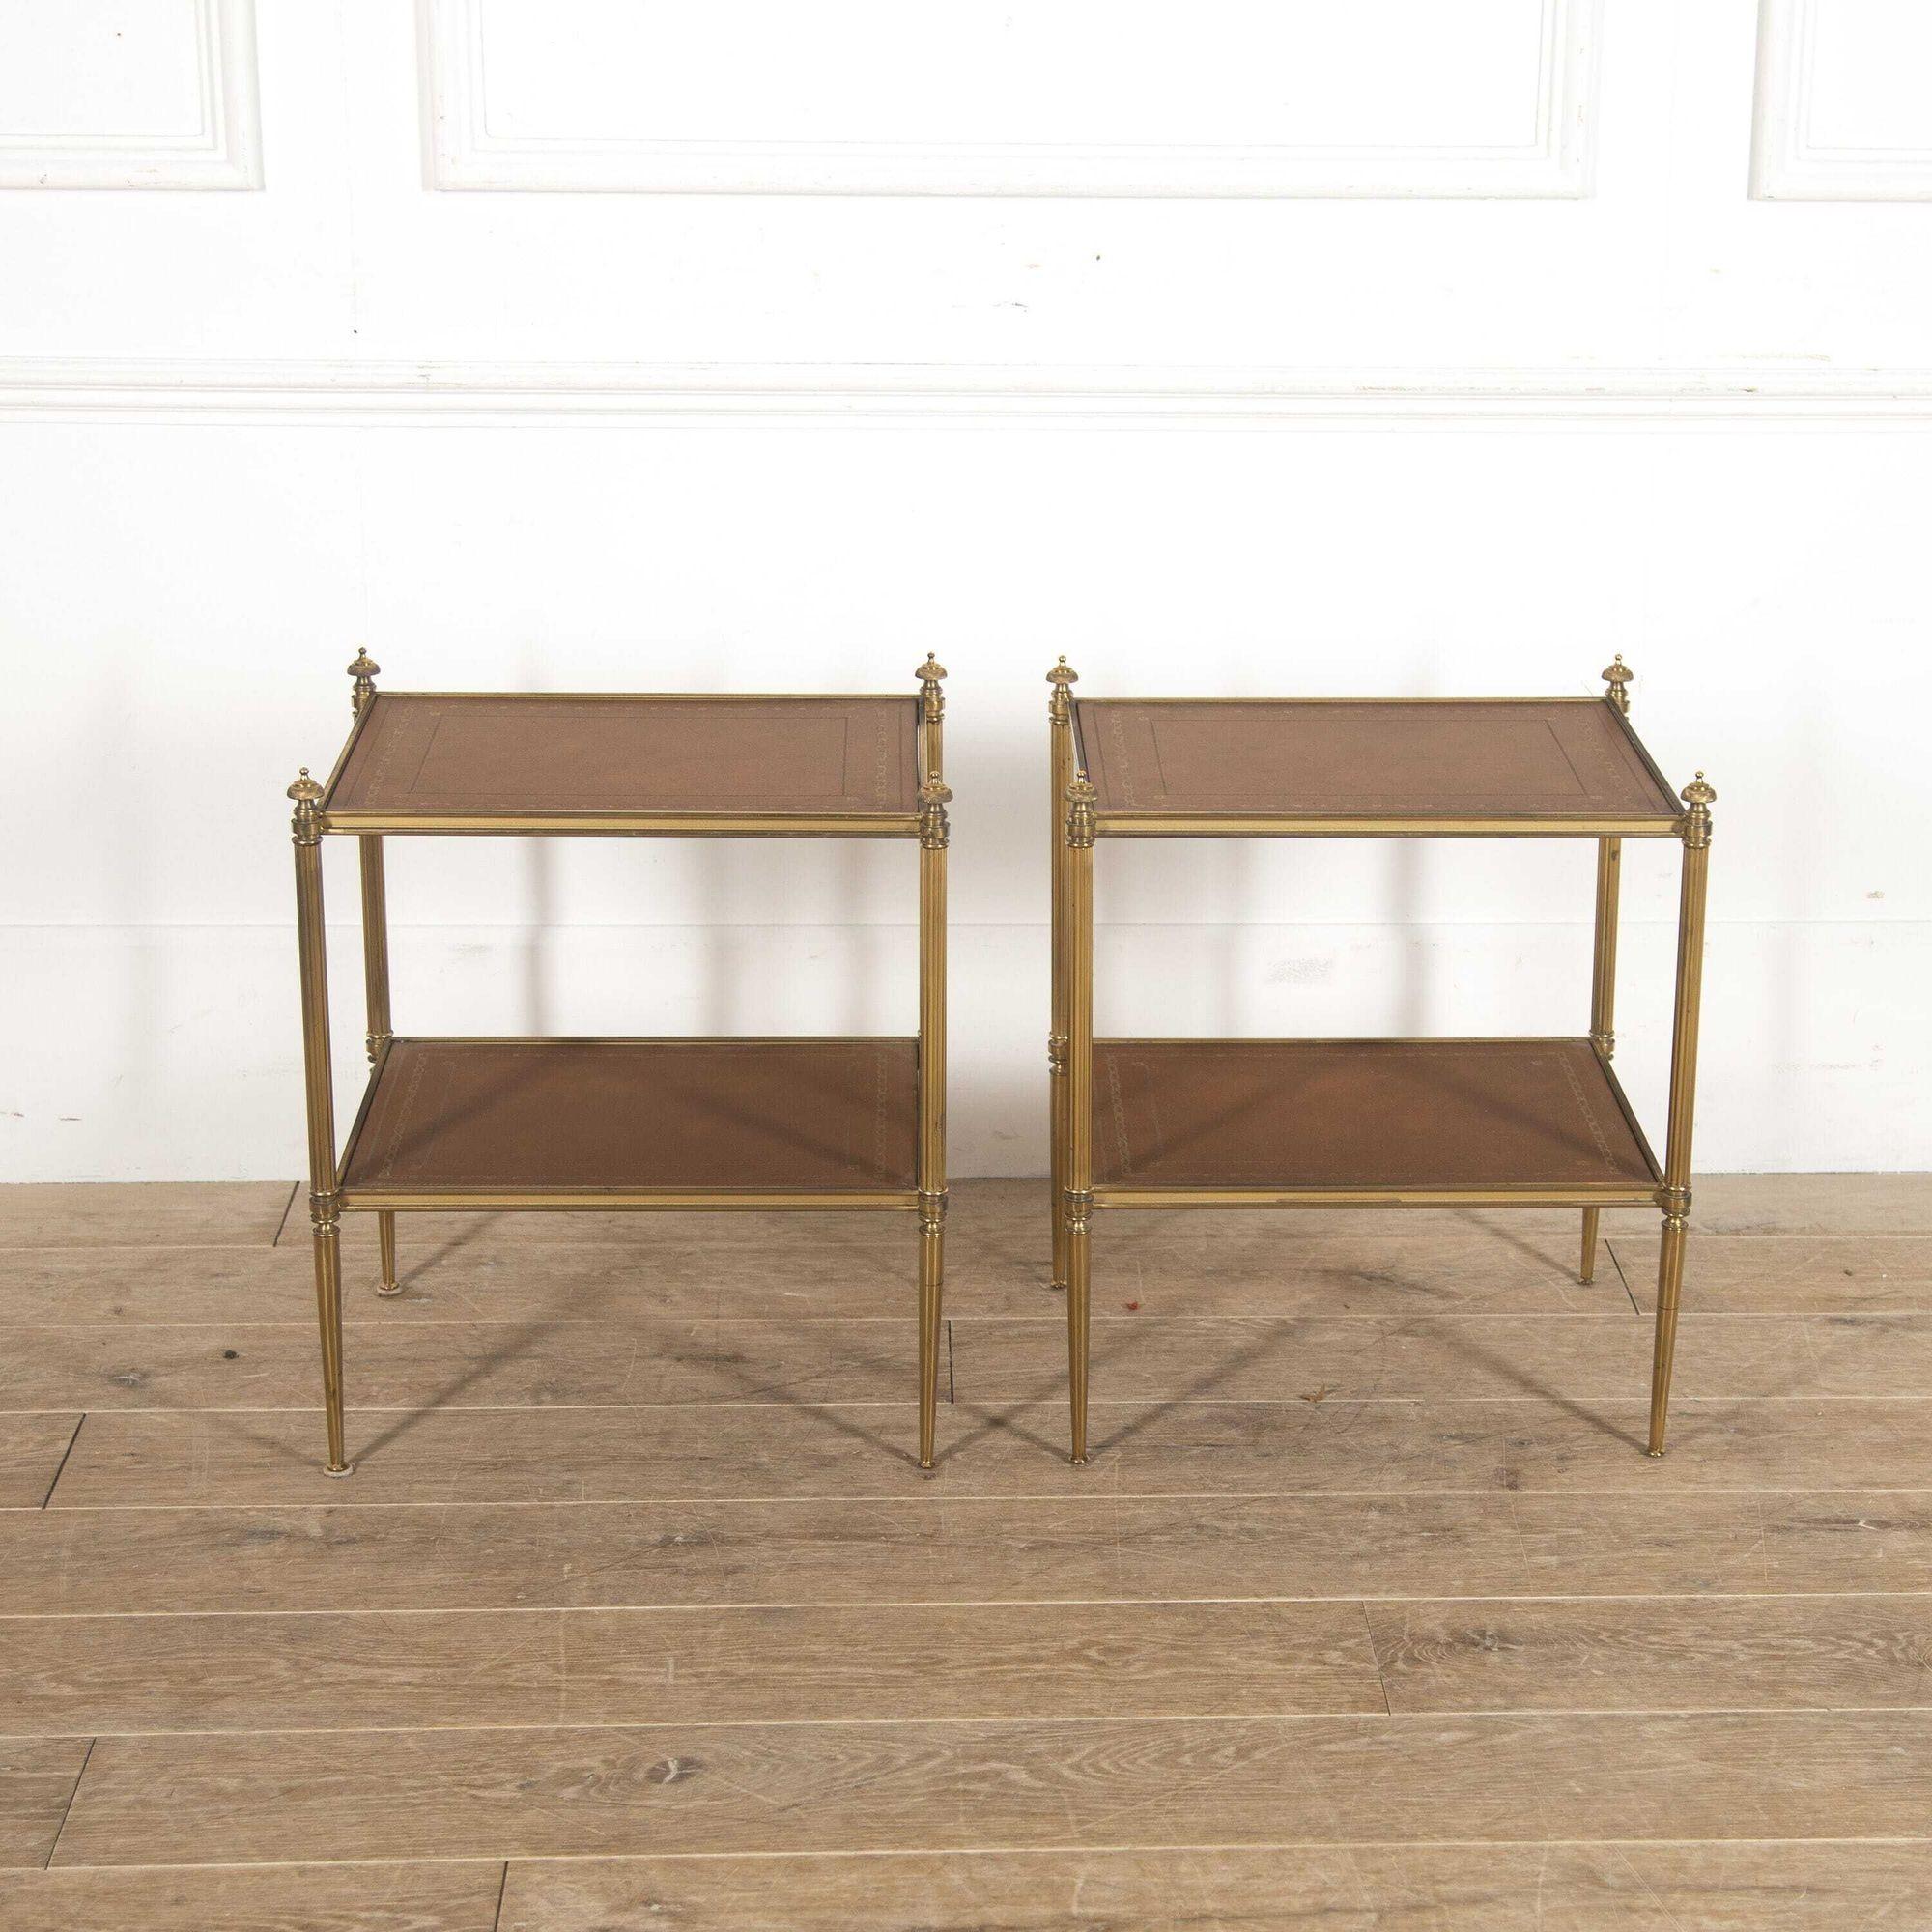 Elegant pair of French neoclassical side tables, circa 1960. 
These stylish tables feature two gilt-tooled tan leather rectangular tiers. The shelves are supported within an elegant brass framework. Decorative finials adorn the tops of the four